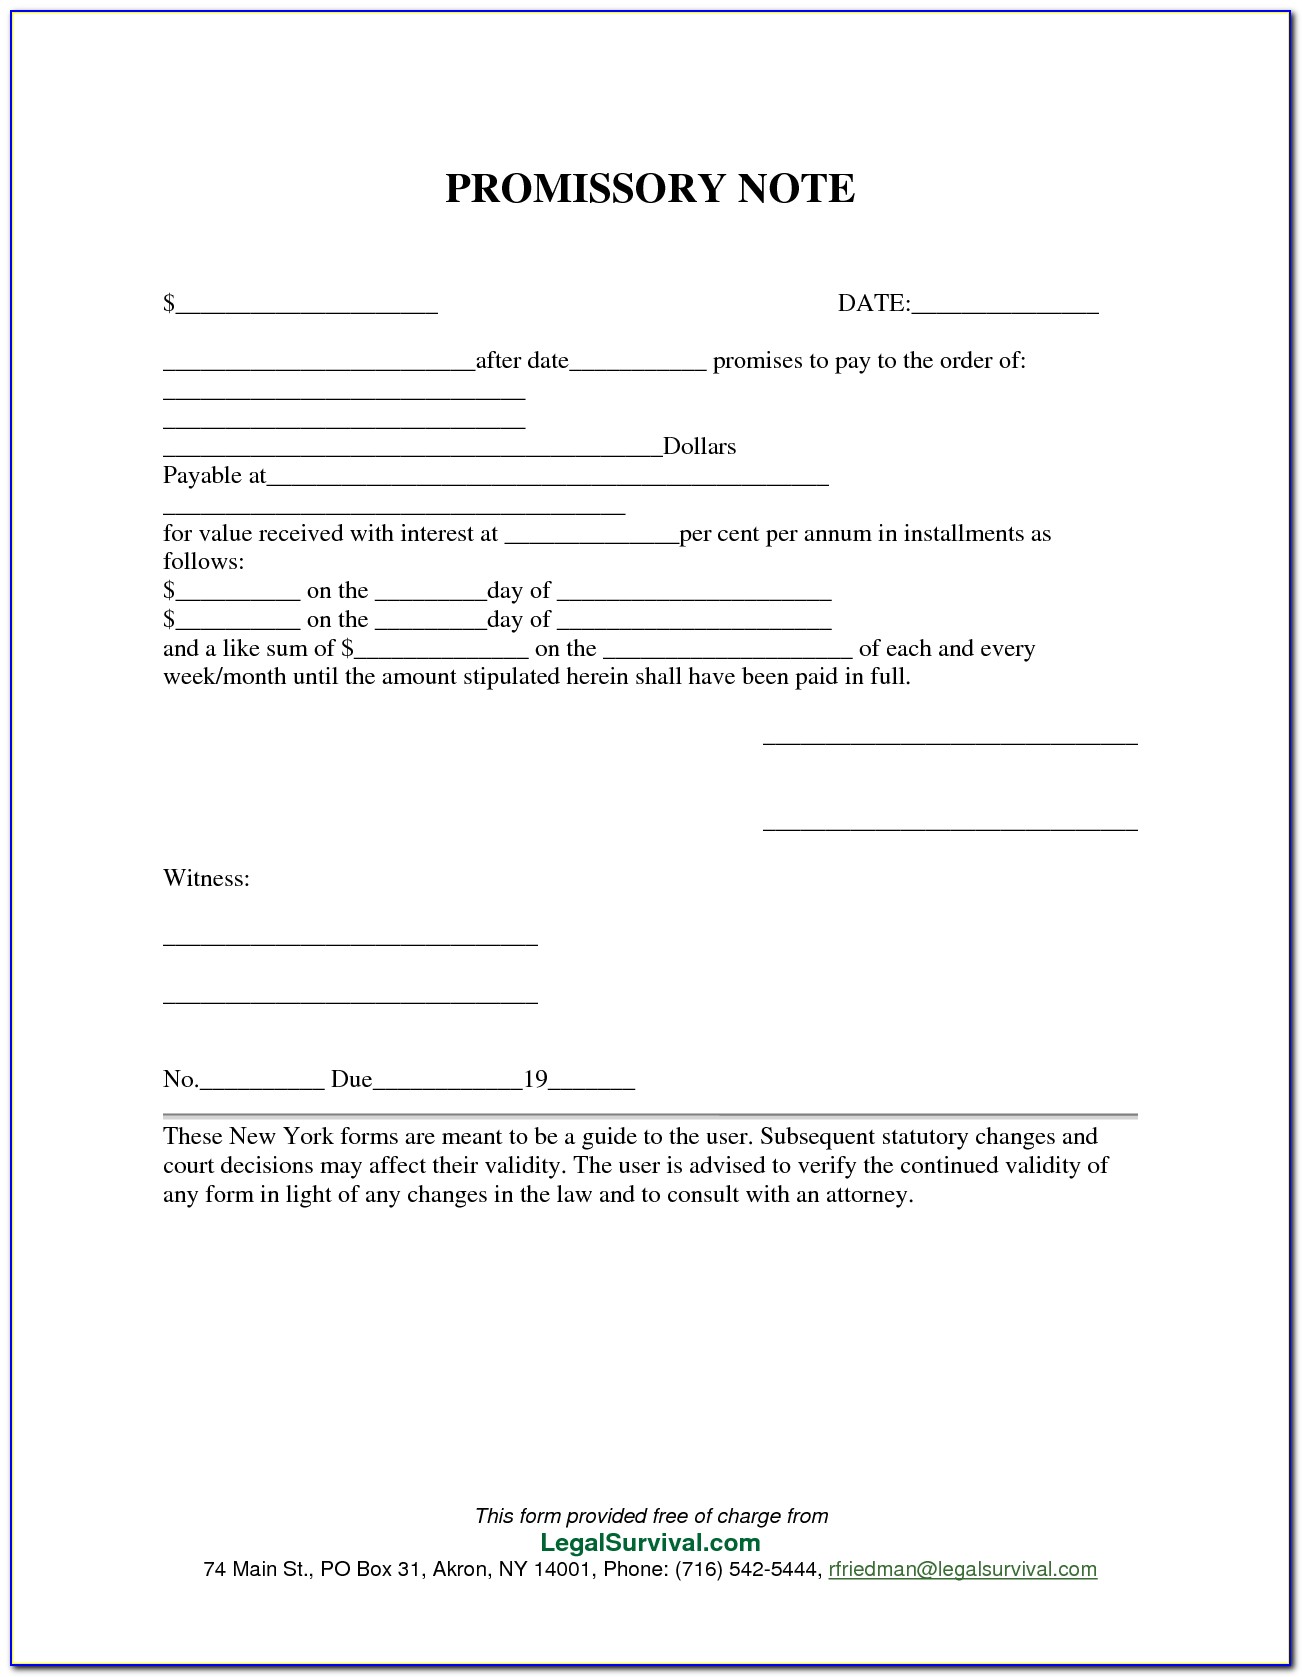 Printable Blank Promissory Note Form